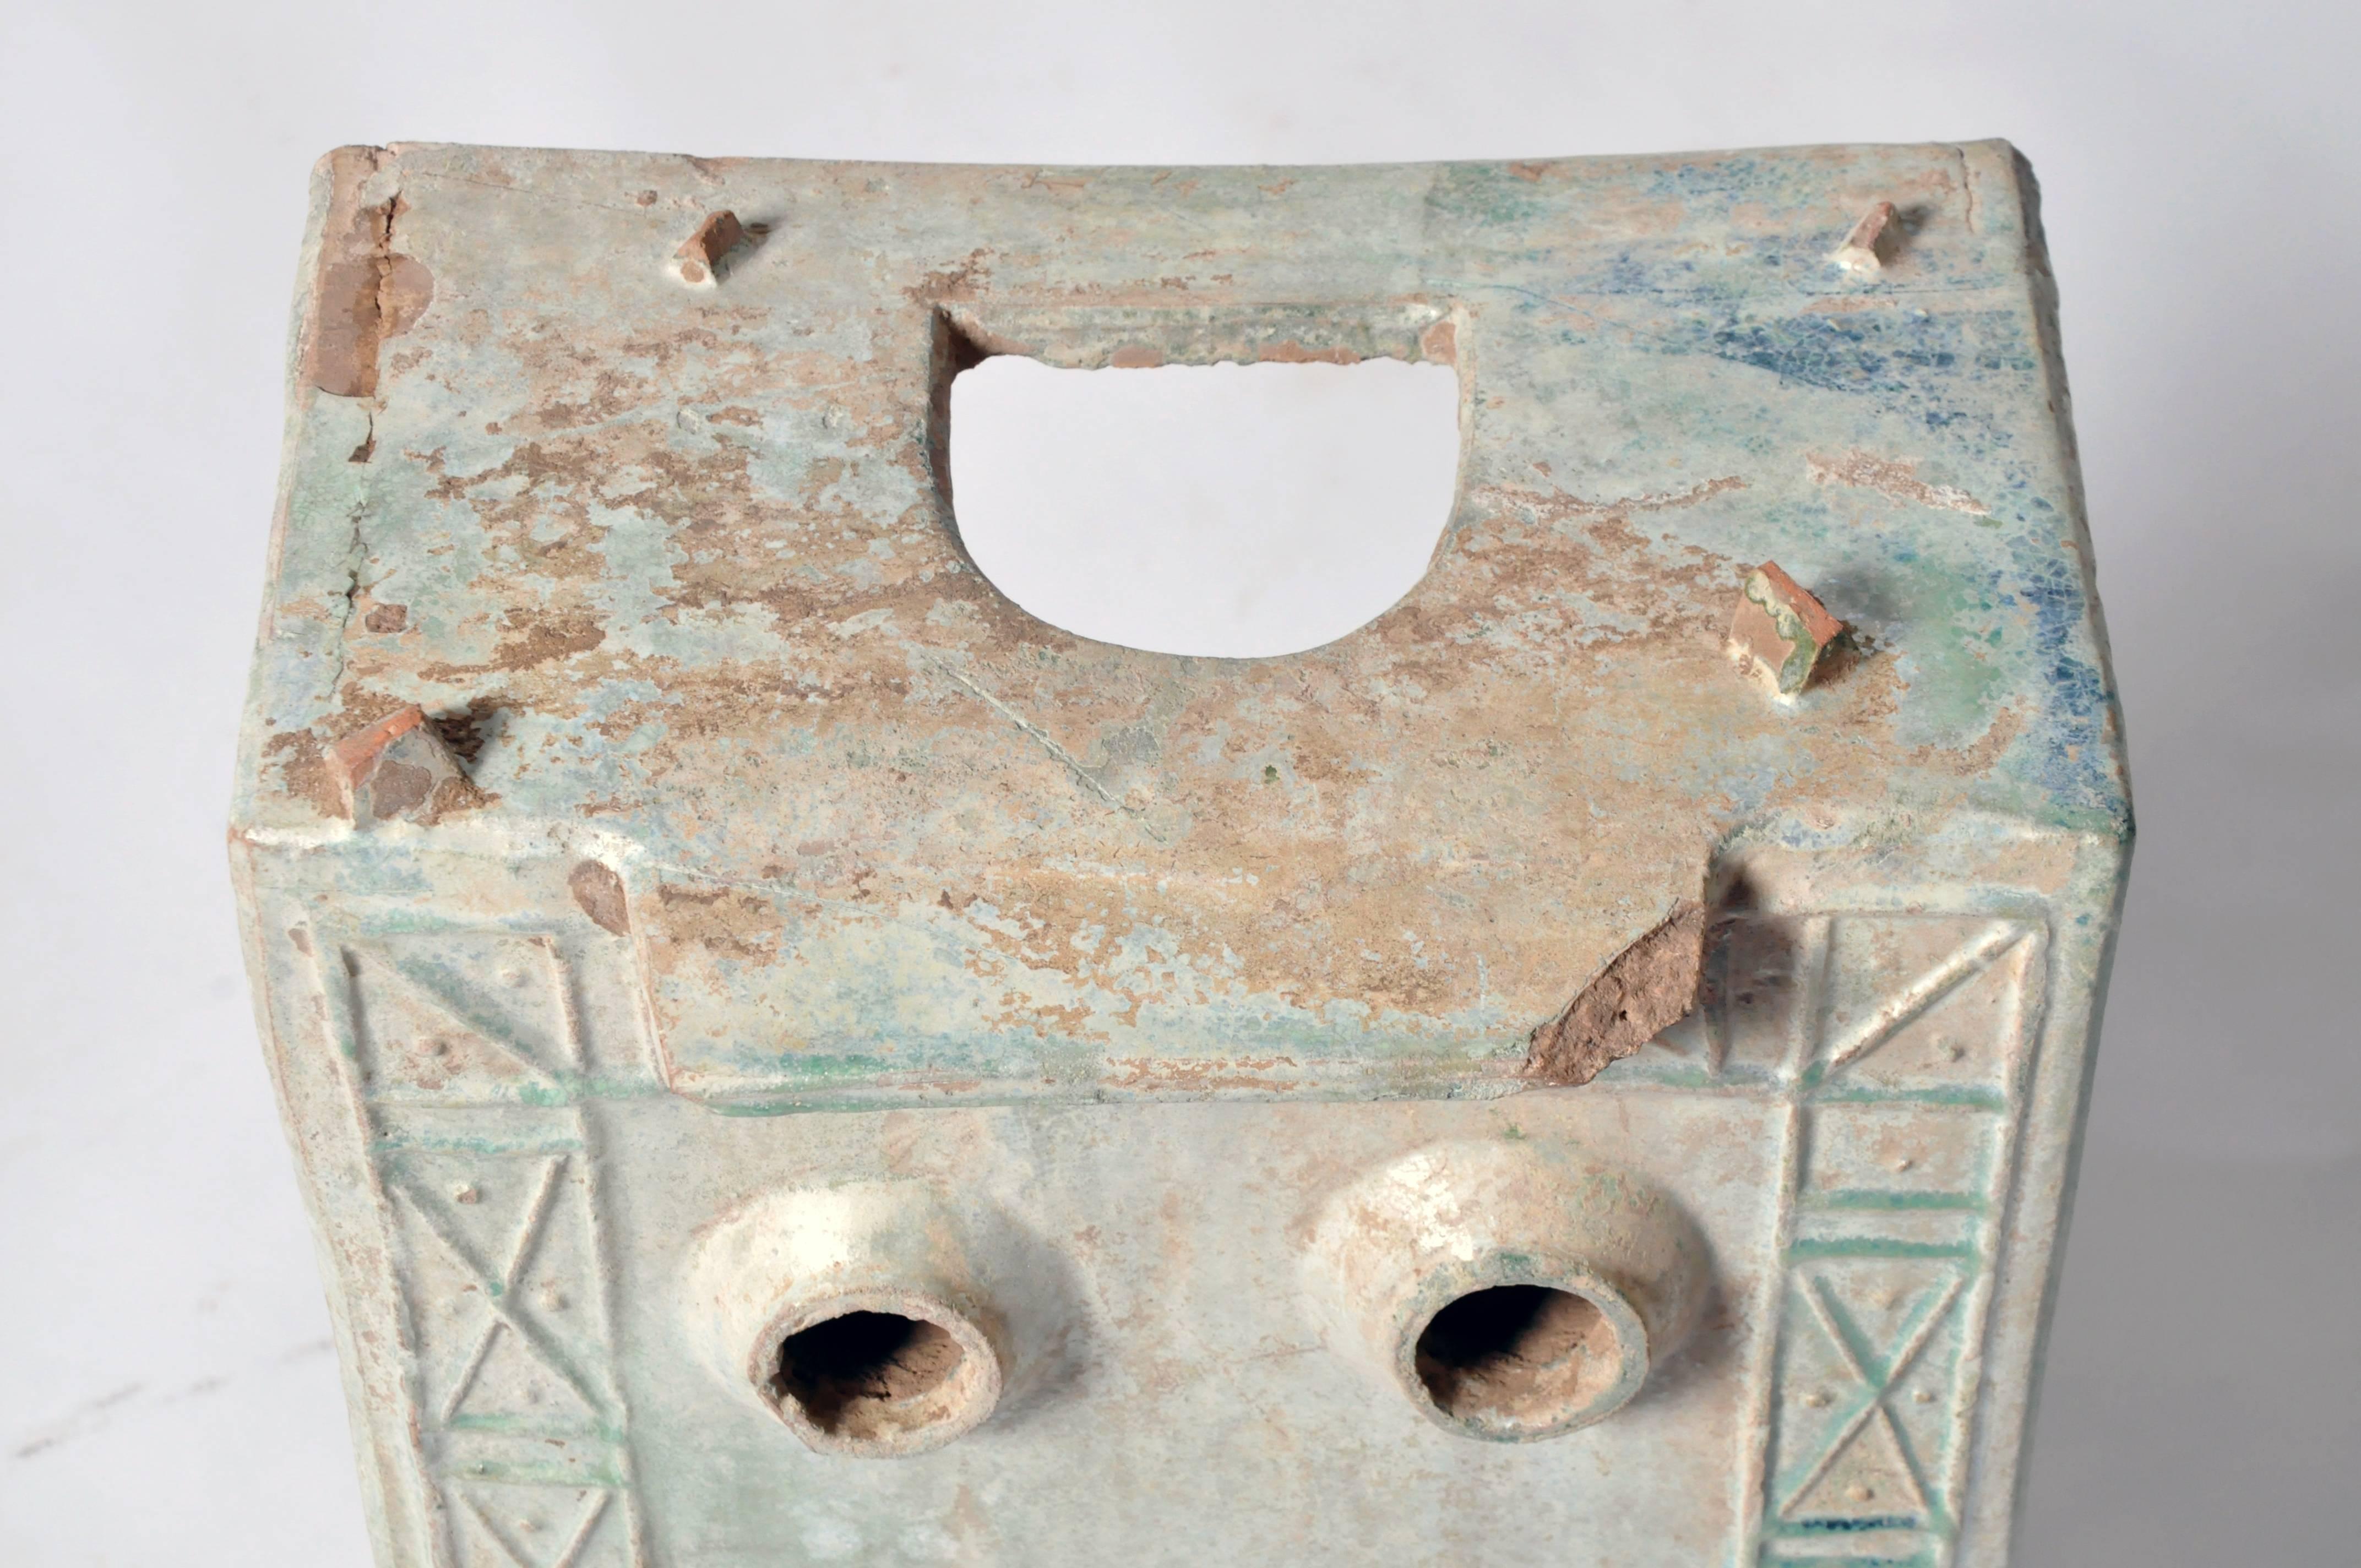 This squat, rectangular piece of tomb pottery features an arched door below a trapezoidal pediment, three circular openings on its top and an incised, decorative border in a geometric pattern. Its light green glaze has developed a handsome